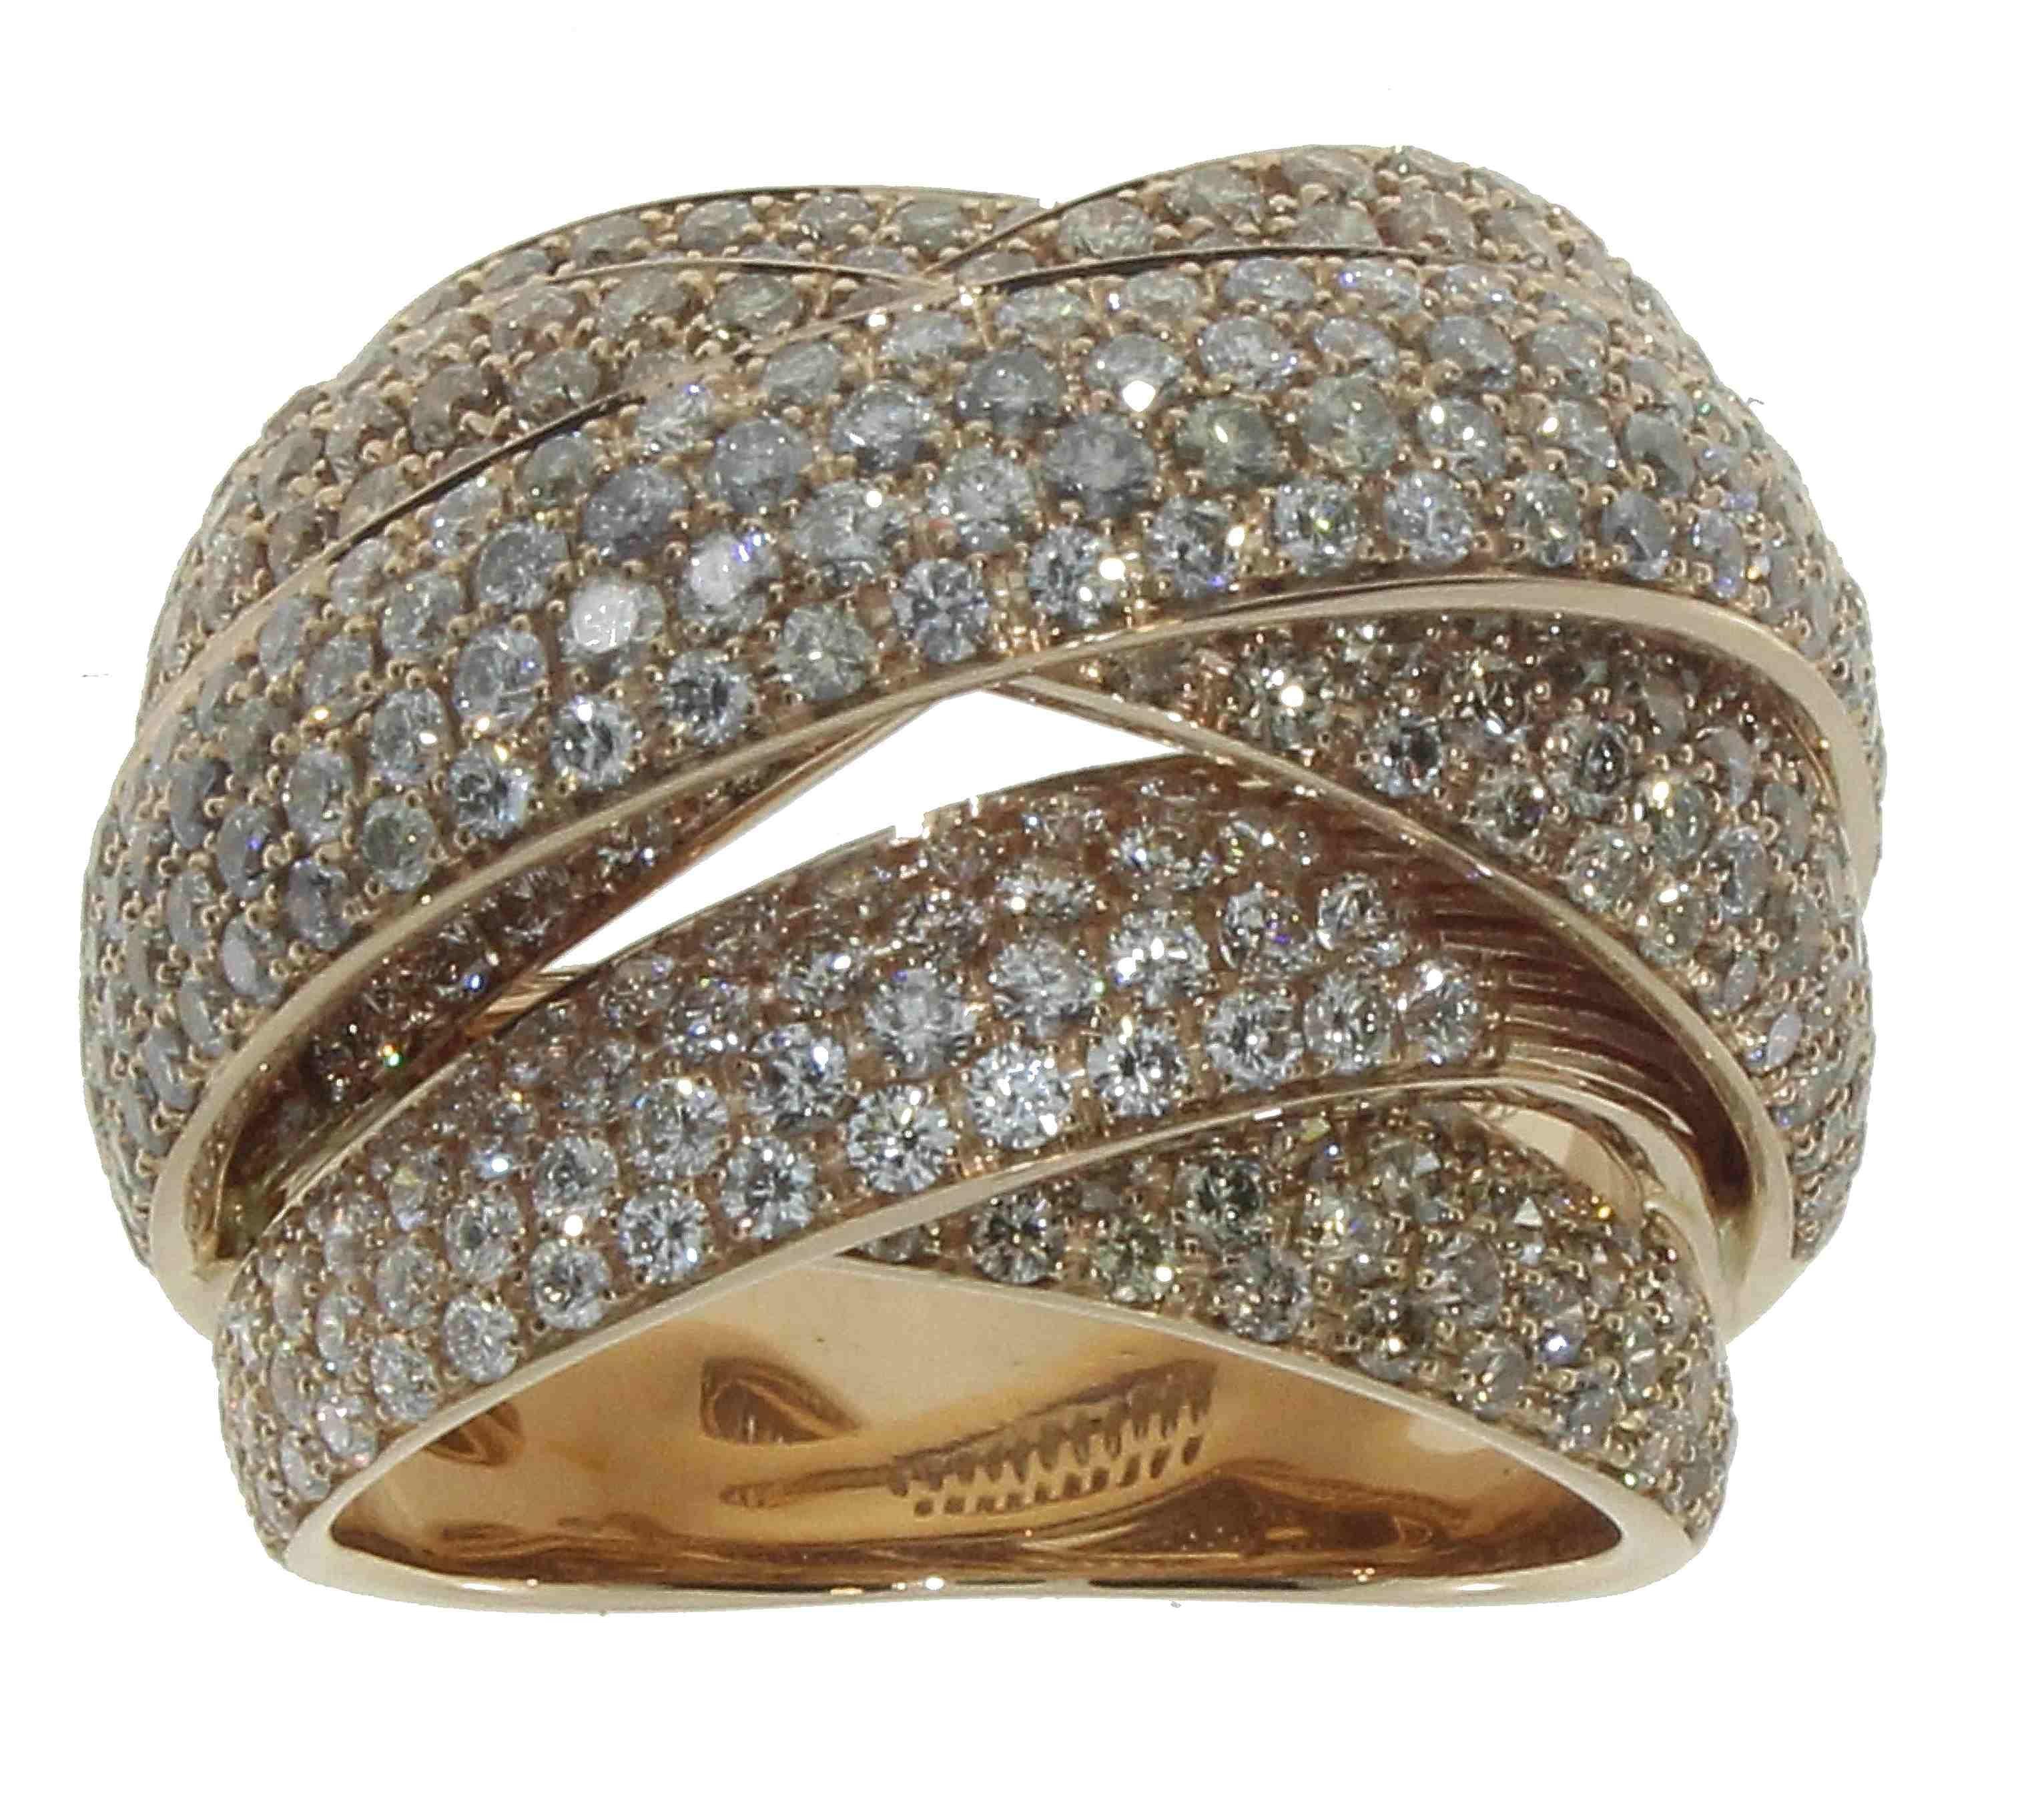 Women's 4.63 Ct White, Brown and Grey Diamonds Intertwined Band Ring in 18kt Gold For Sale